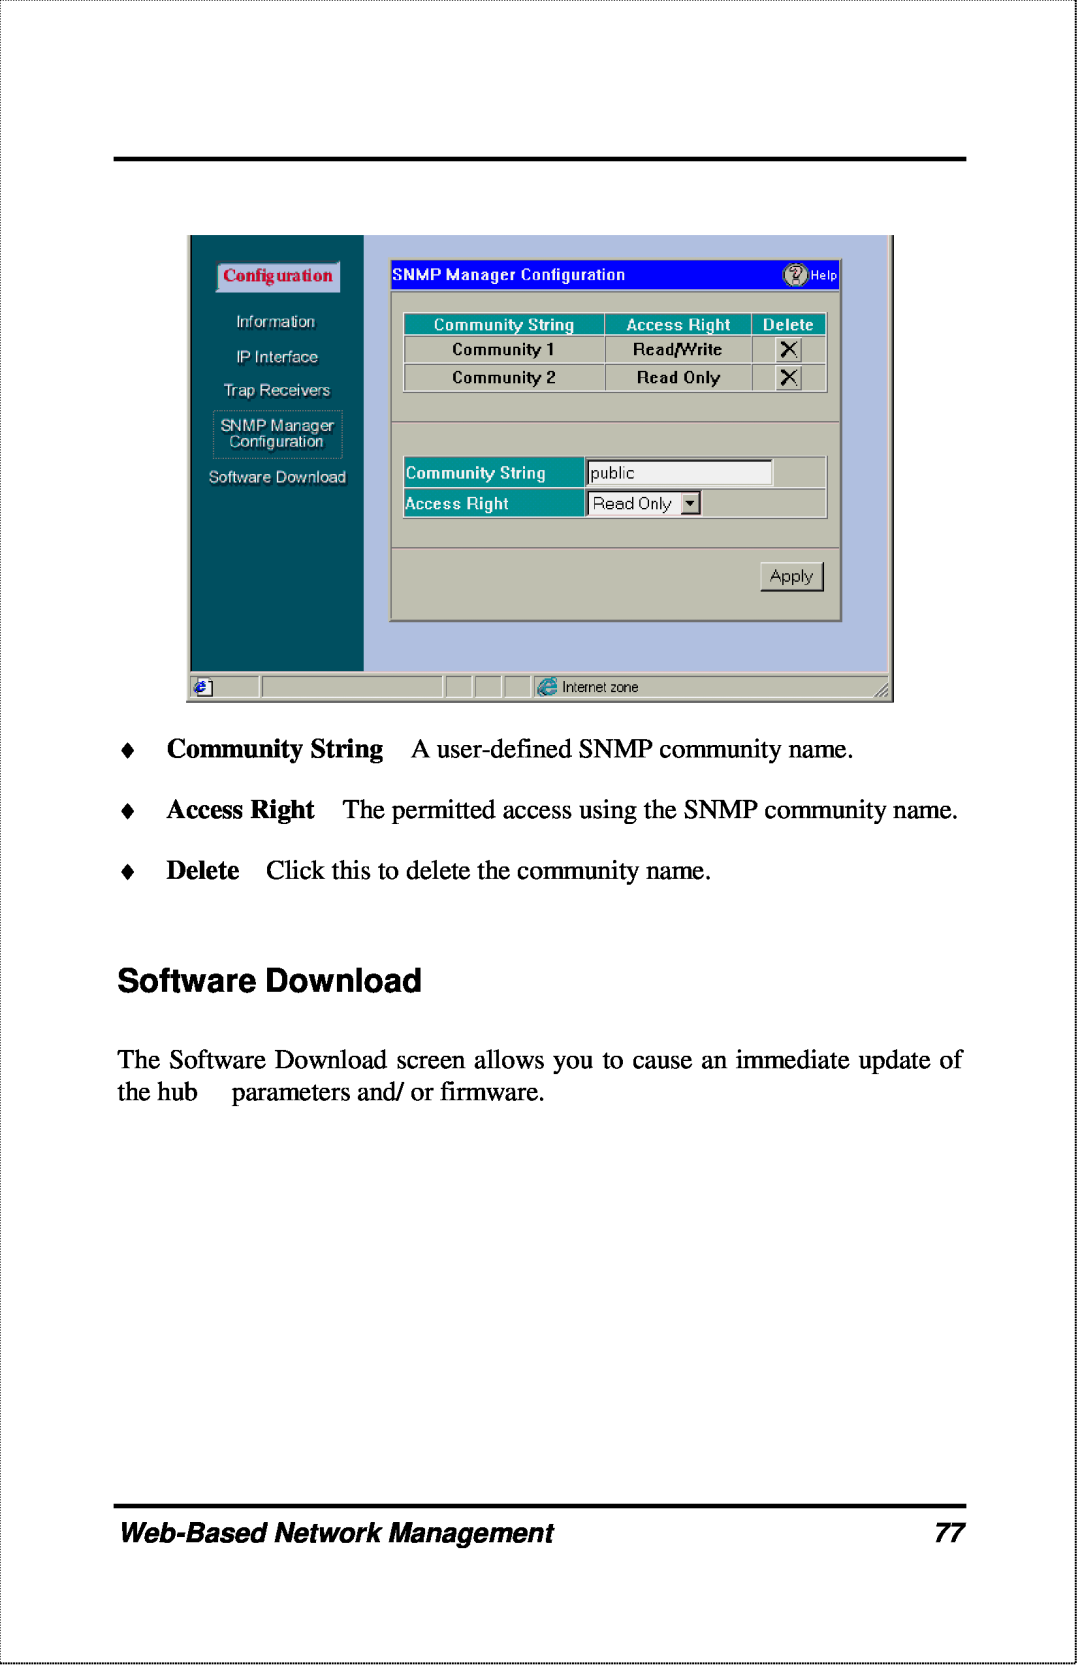 D-Link DFE-2600 manual Software Download, Community String A user-defined SNMP community name, Web-Based Network Management 